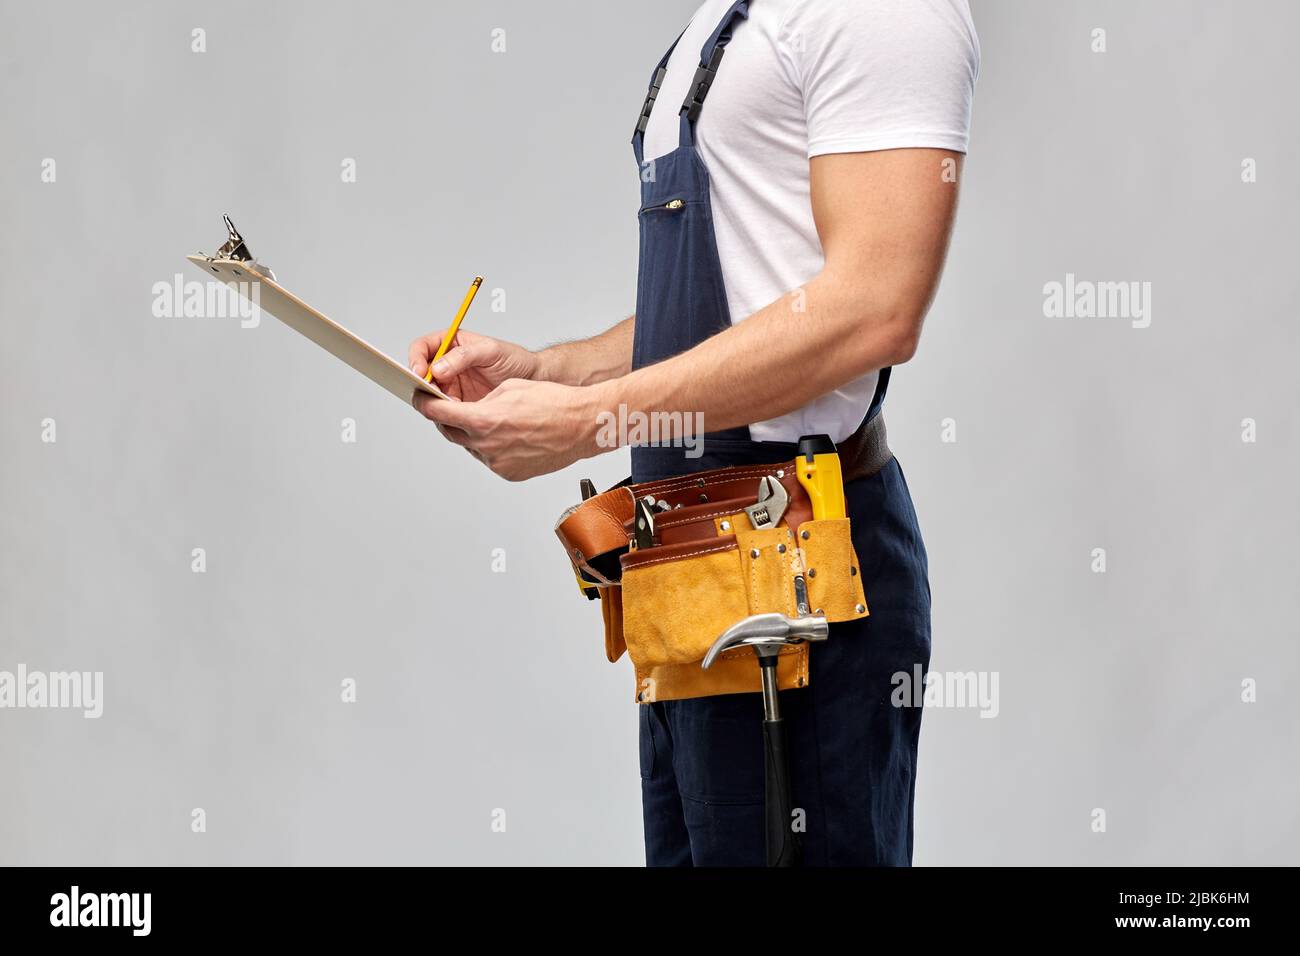 builder with clipboard, pencil and working tools Stock Photo